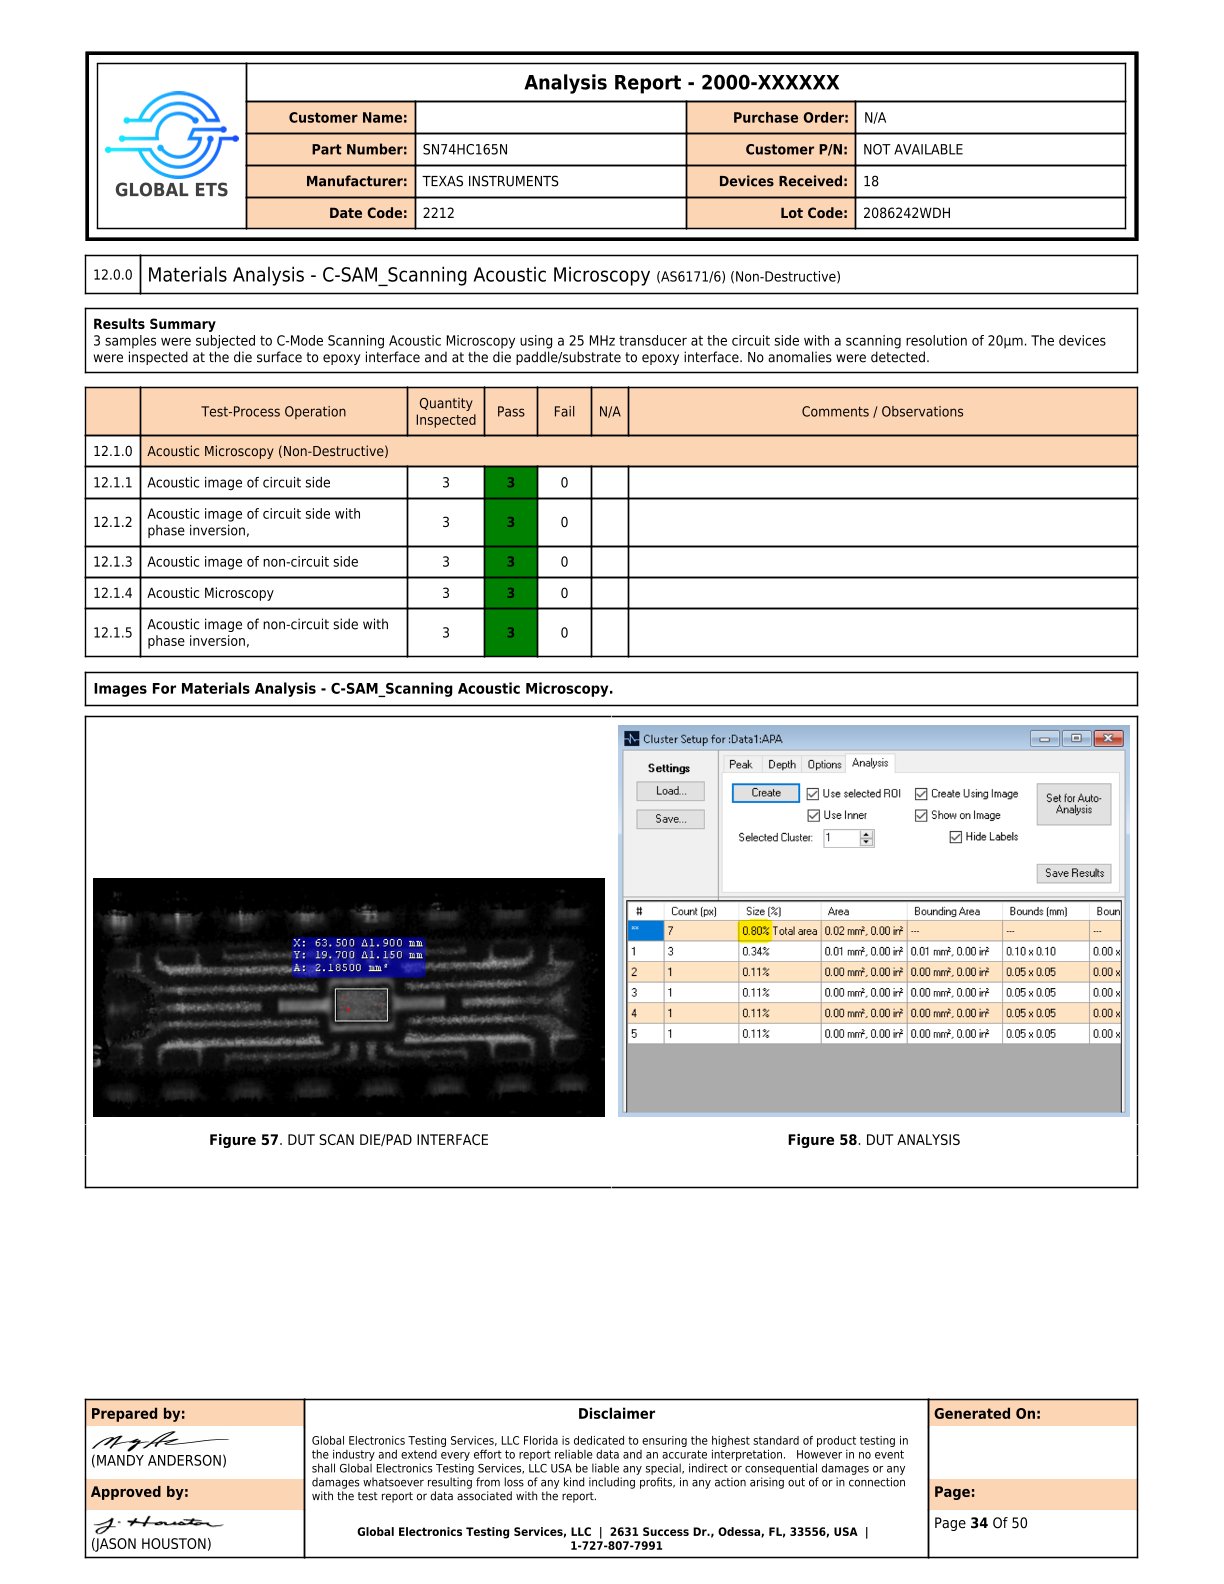 - Analysis Report by Global Electronics Testing Services with Customer Name, Part Number, Manufacturer, Date Code, and Lot Code filled out. It has a section on Materials Analysis - C-SAM, Scanning Acoustic Microscopy with a Results Summary and a Test-Process Operation table indicating the quantity inspected, passed, and N/A for various acoustic microscopy inspections. There are two figures at the bottom of the report, Figure 57 labeled as DUT SCAN DIE/PAD INTERFACE and Figure 58 labeled as DUT ANALYSIS showing scanning acoustic microscopy images.